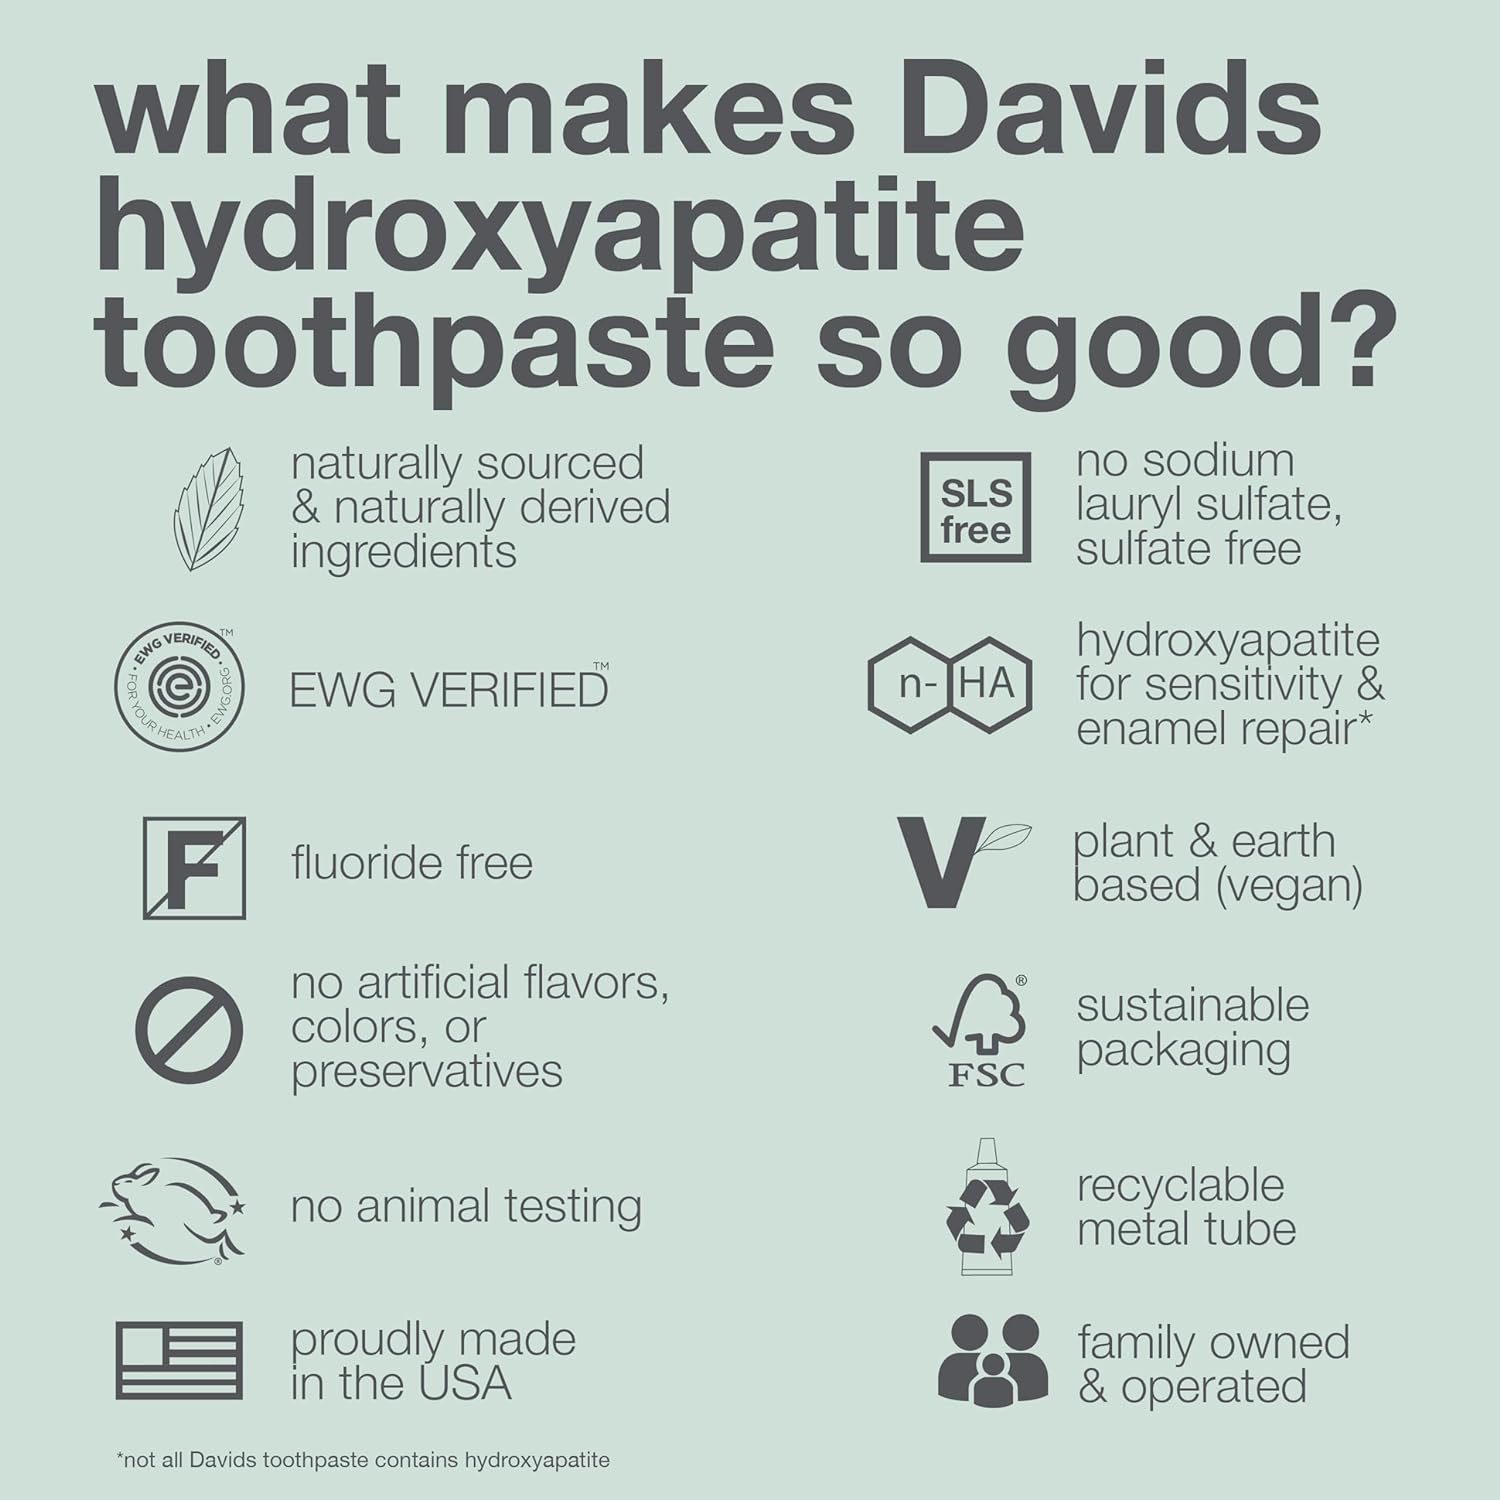 Buy Davids Nano Hydroxyapatite Toothpaste and Tongue Scraper Bundle, Remineralize Enamel, Sensitive Relief & Teeth Whitening - Antiplaque, Fluoride Free, SLS Free, Peppermint, 5.25oz, Made in USA on Amazon.com ? FREE SHIPPING on qualified orders